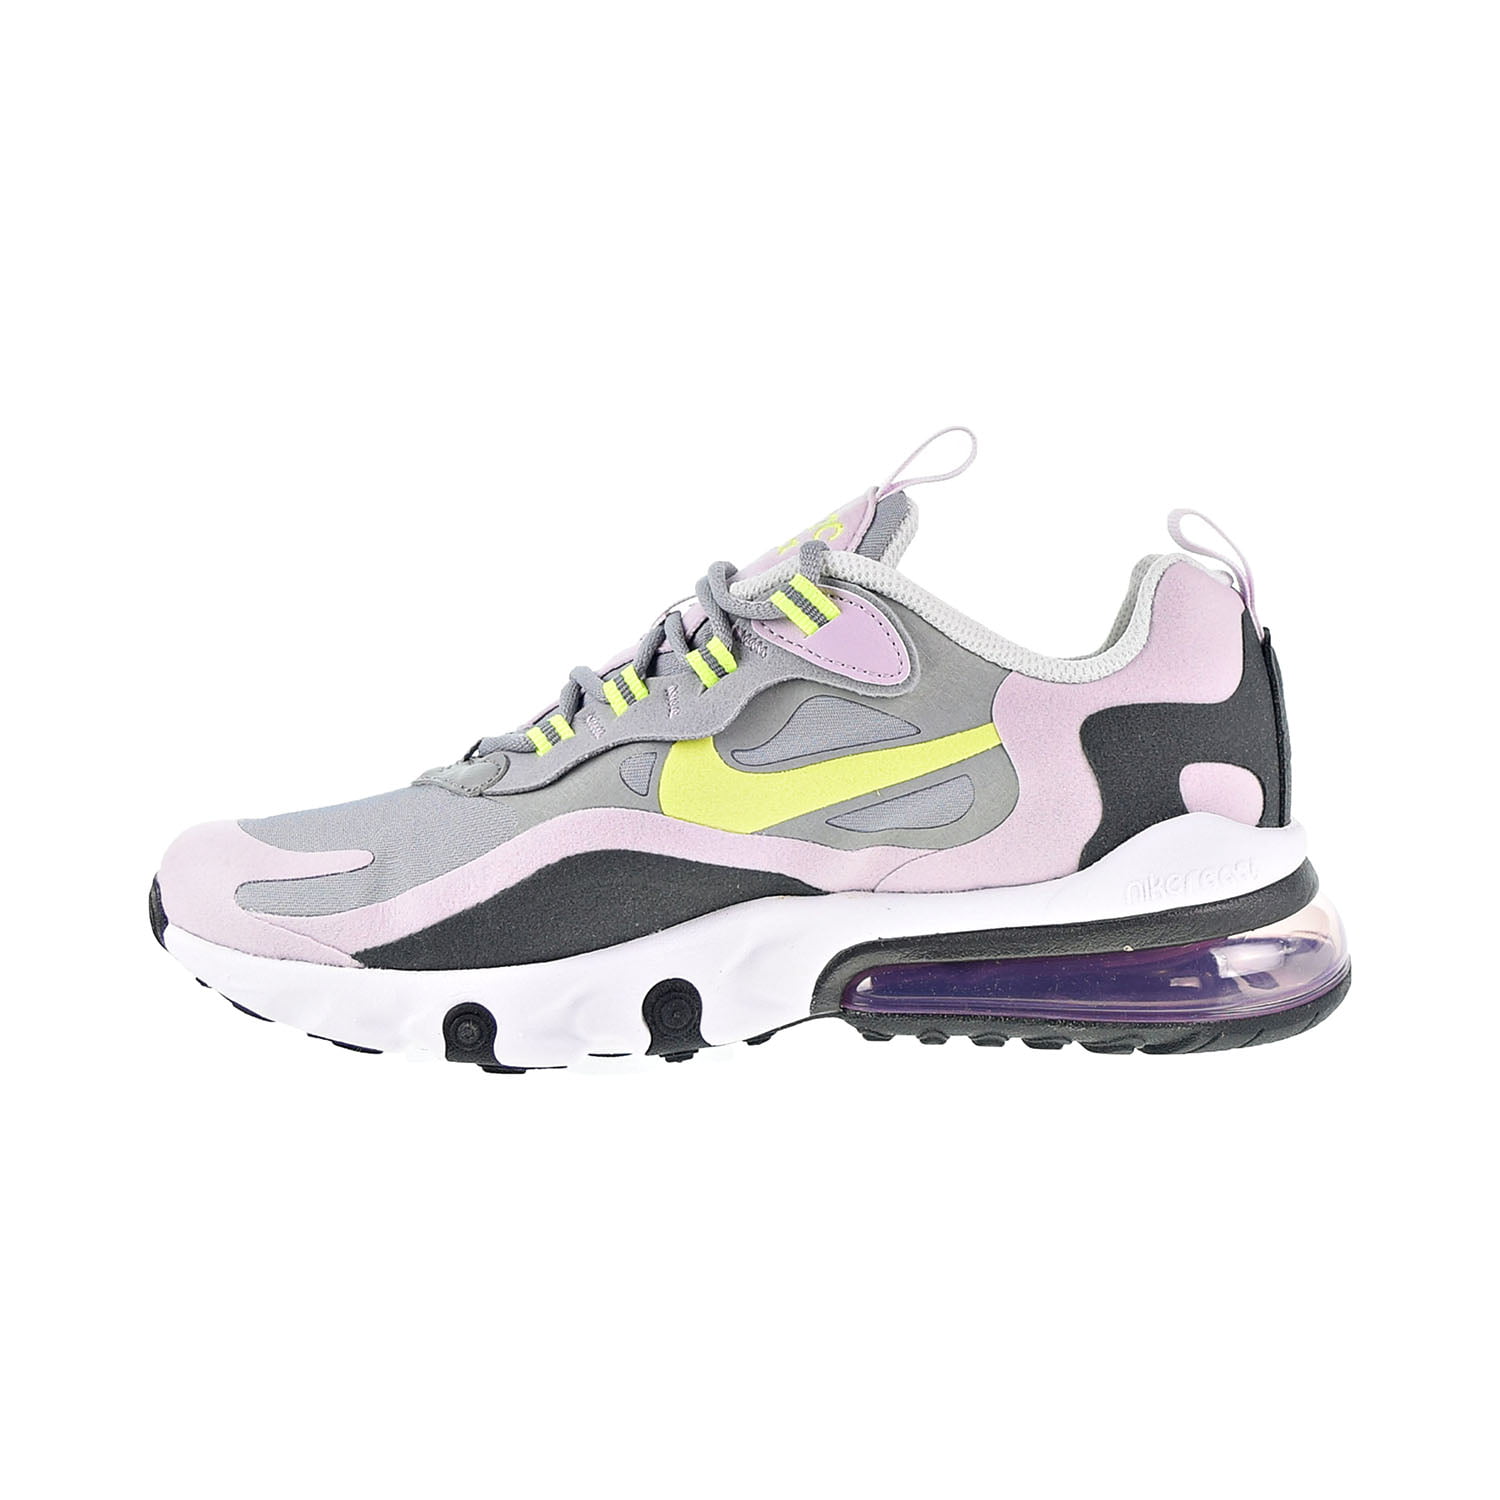 Nike Air Max 270 React GS BQ0103-400 Youth Kid's Multicolor Sneakers Shoe  HS1800 (5) 